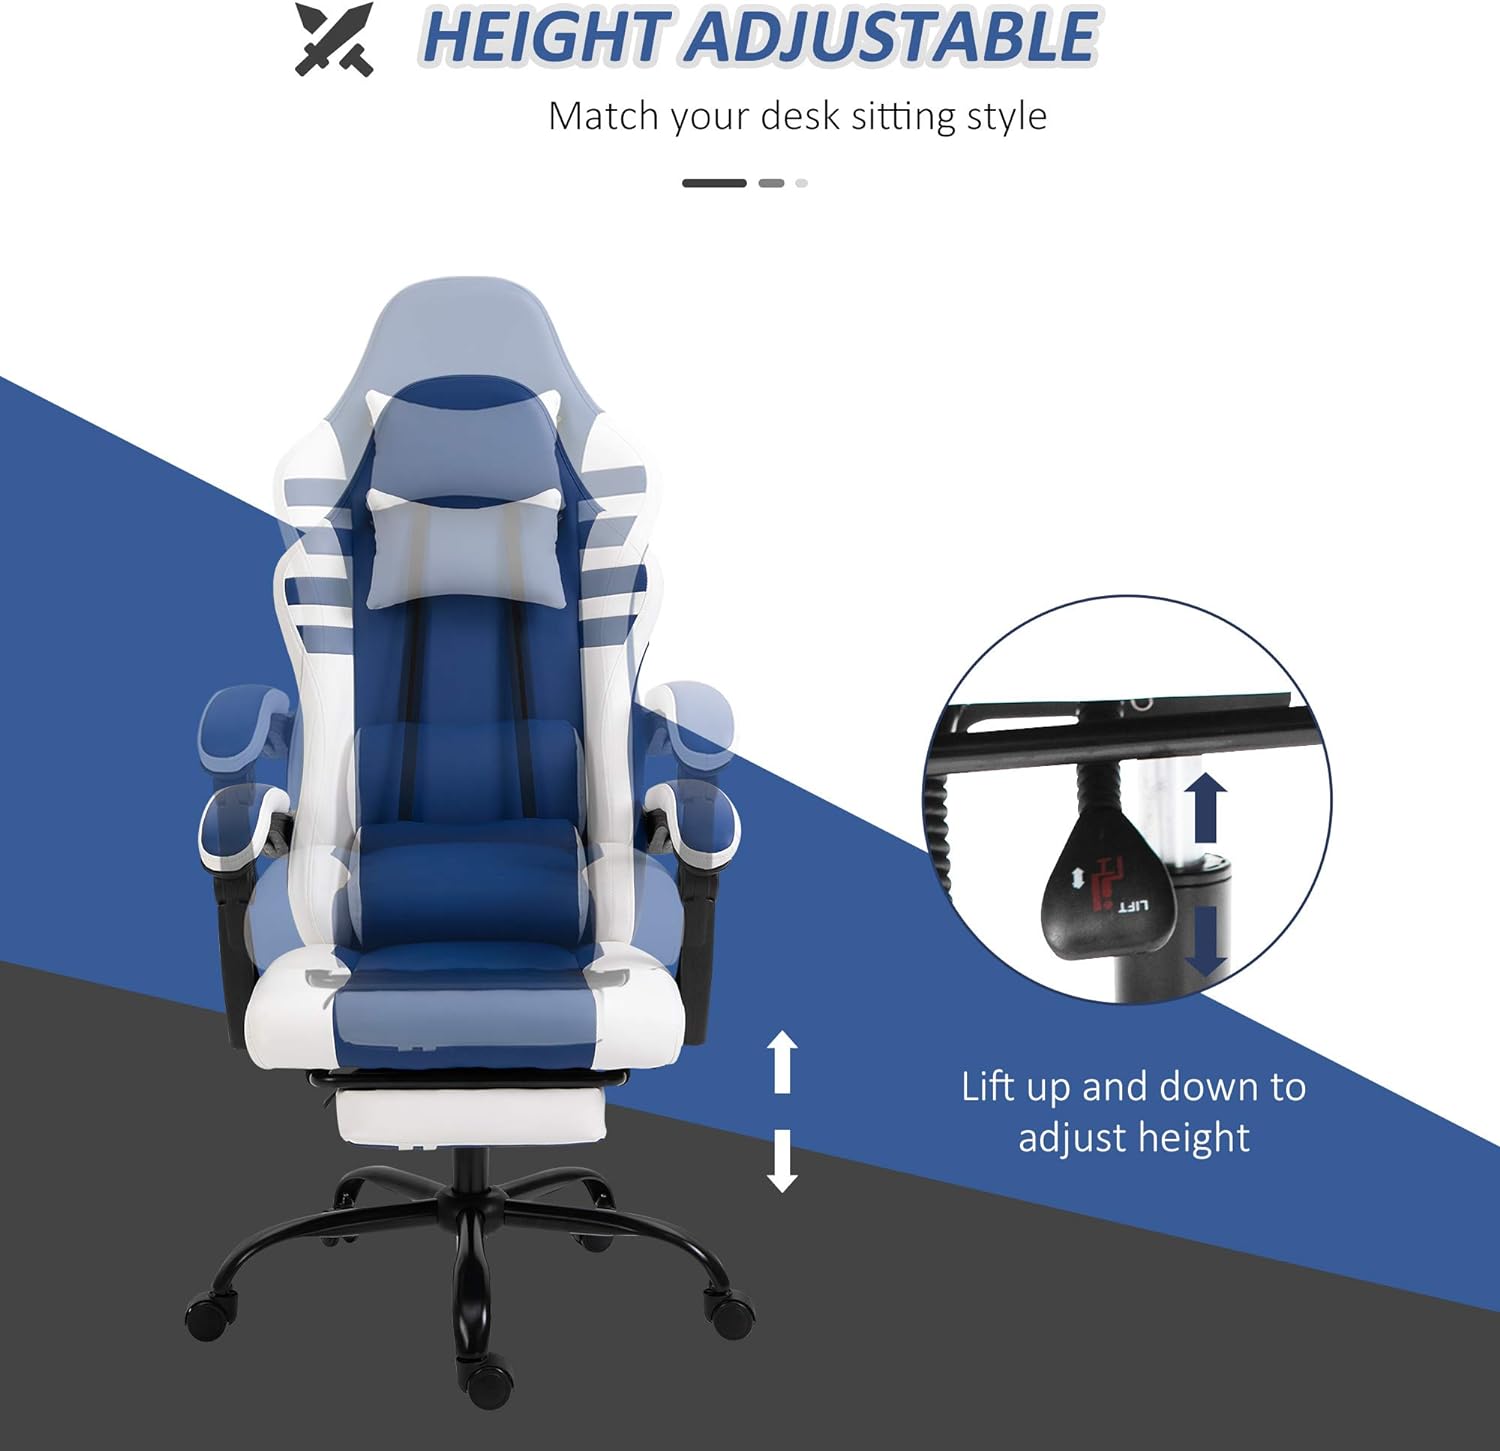 Maplin Plus PU Leather Reclining Adjustable Gaming Chair with Headrest & Footrest - Blue & White - maplin.co.uk